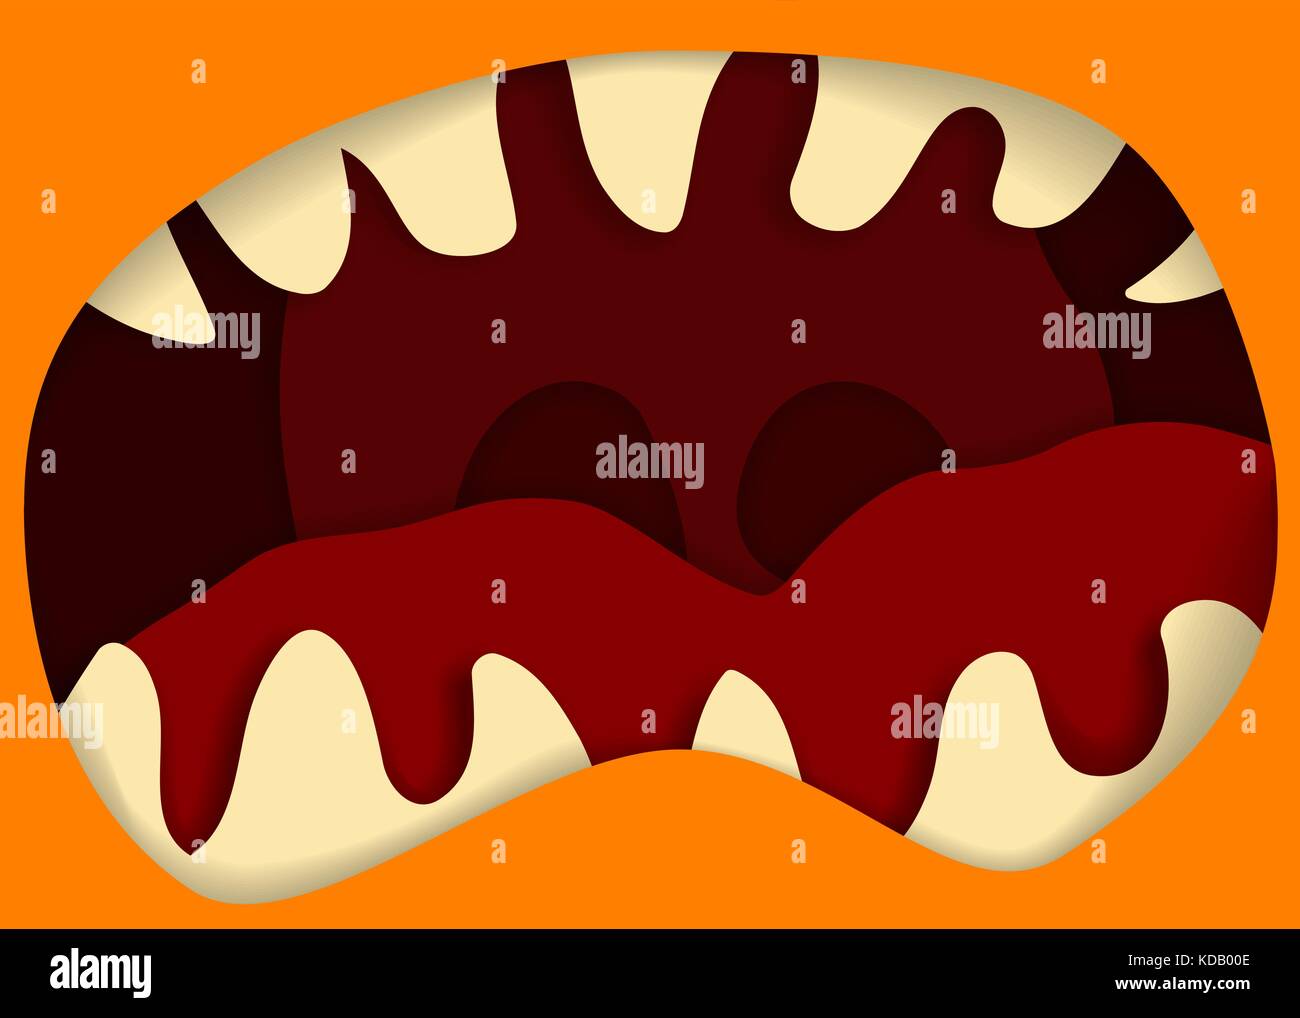 Monster mouth and teeth vector illustration, for halloween banner